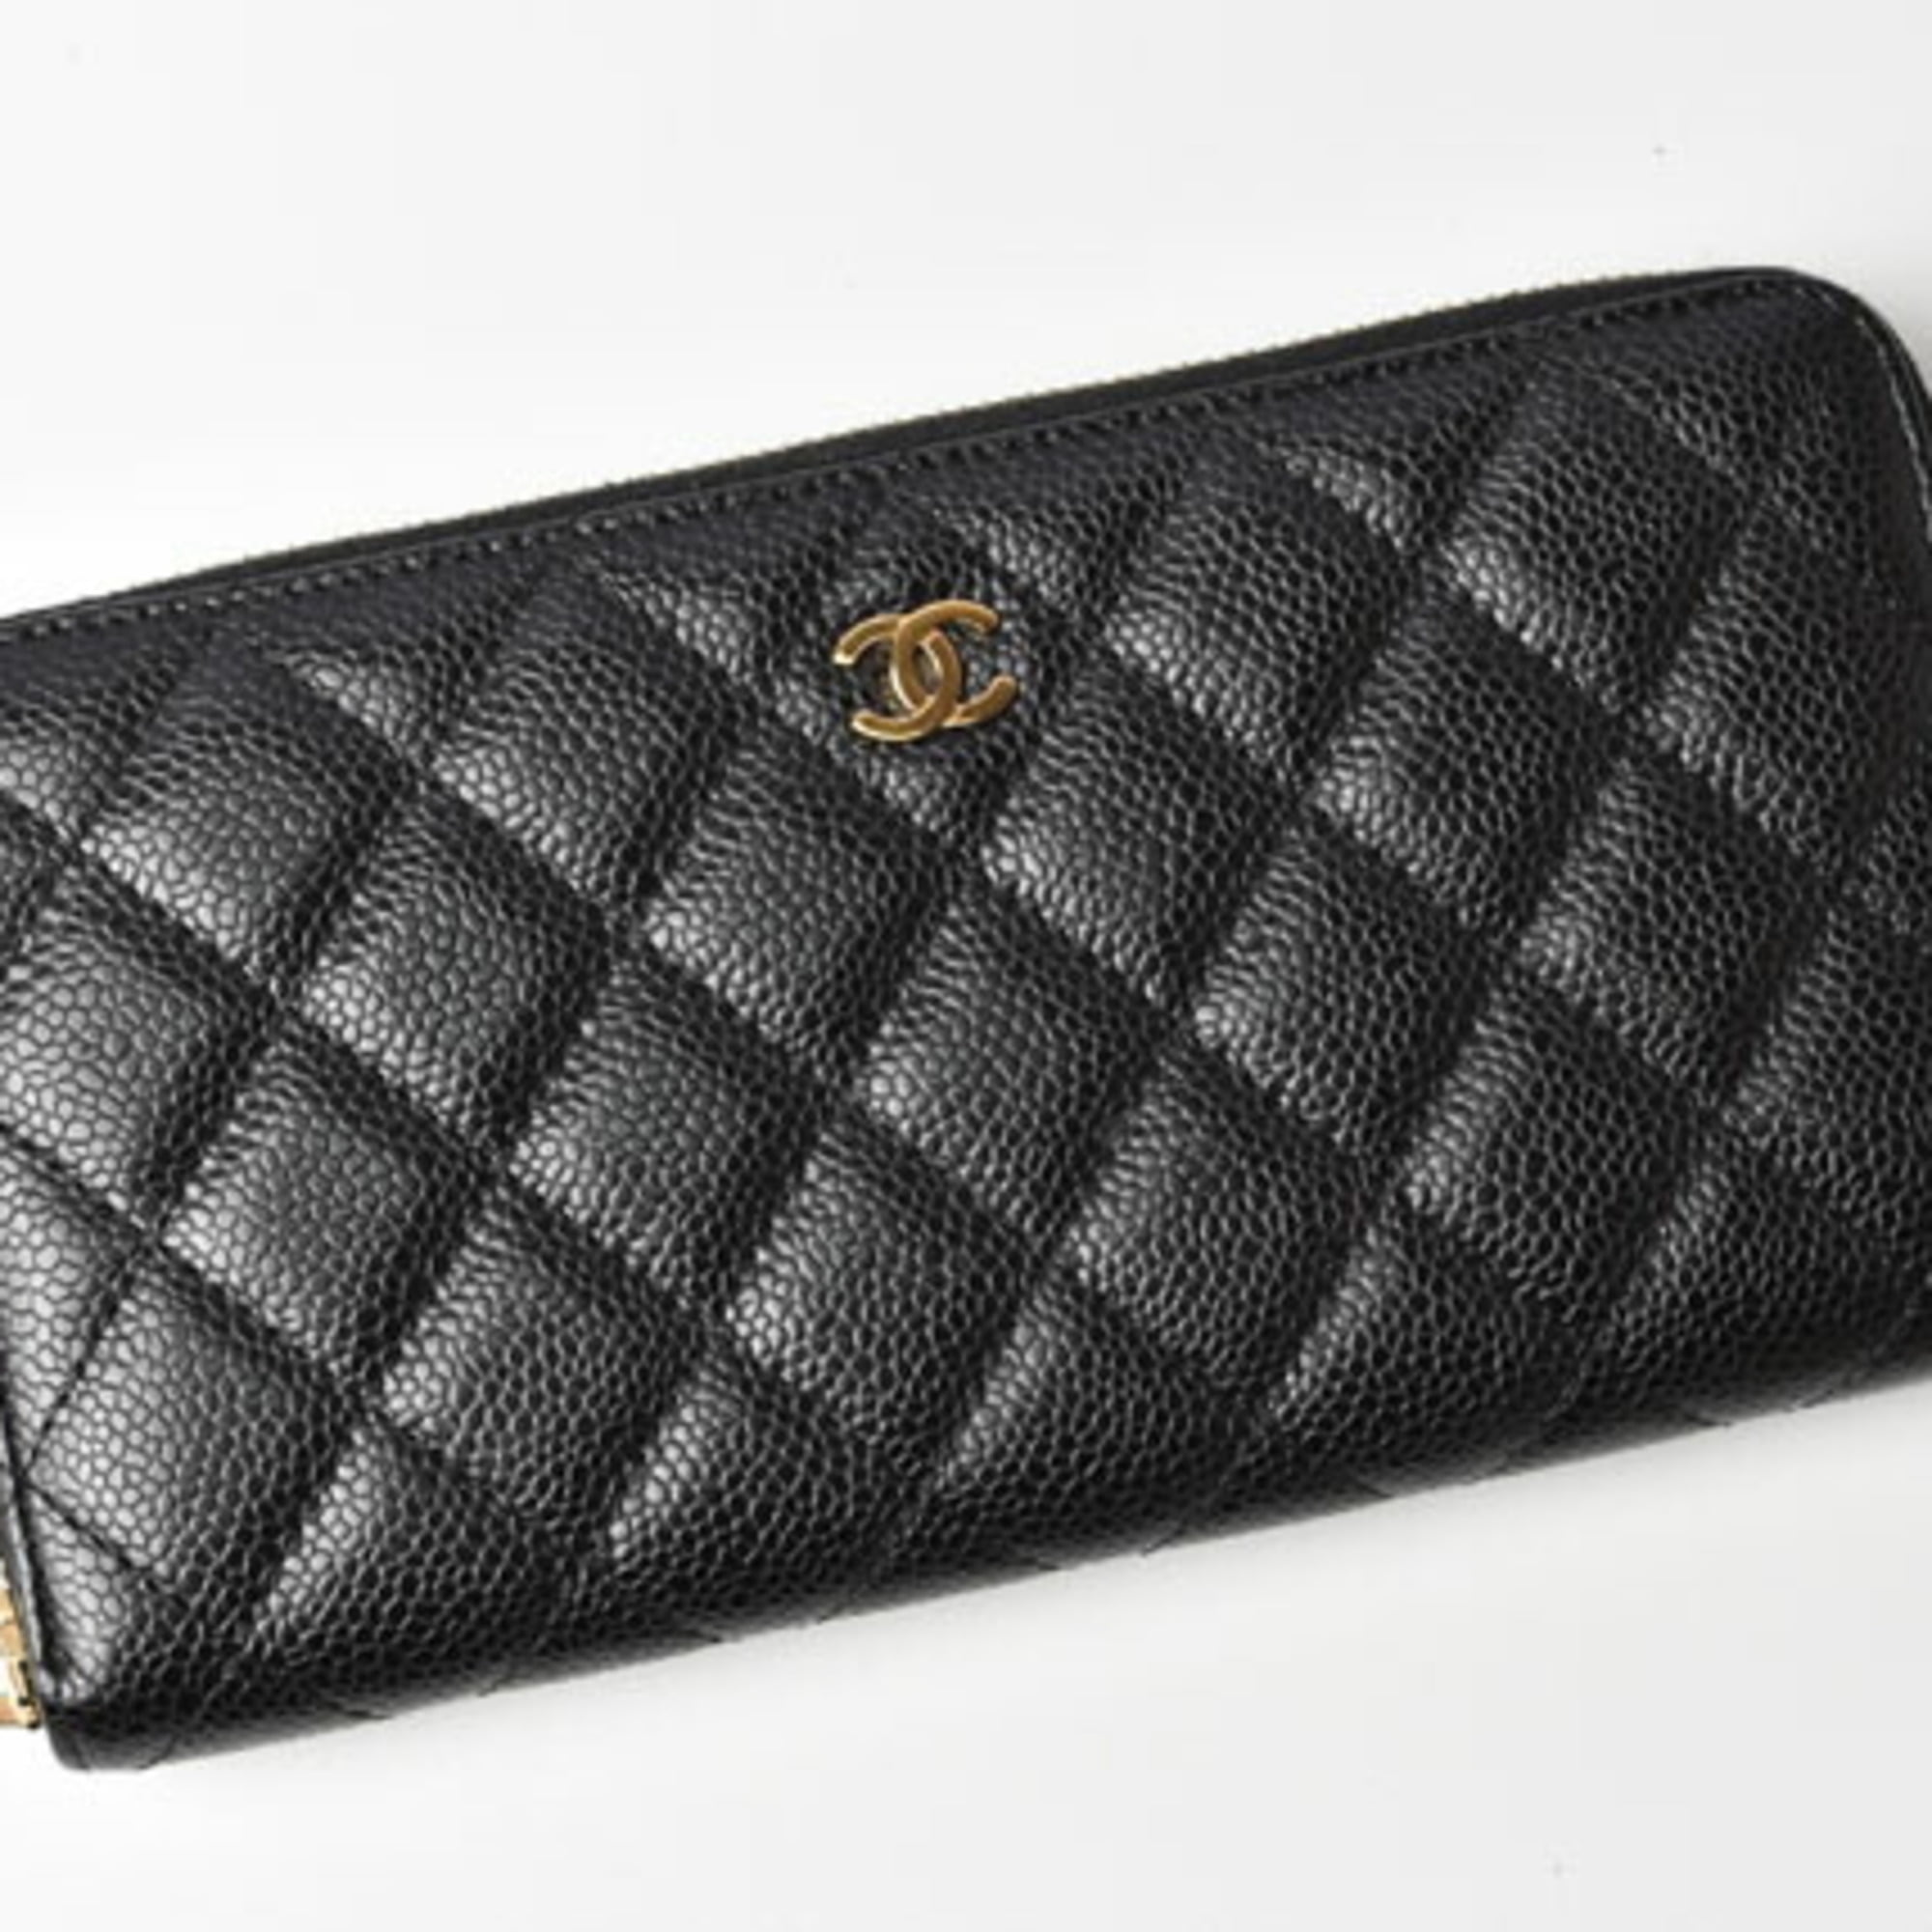 Classic Wallet On Chain WOC in Black Caviar GHW